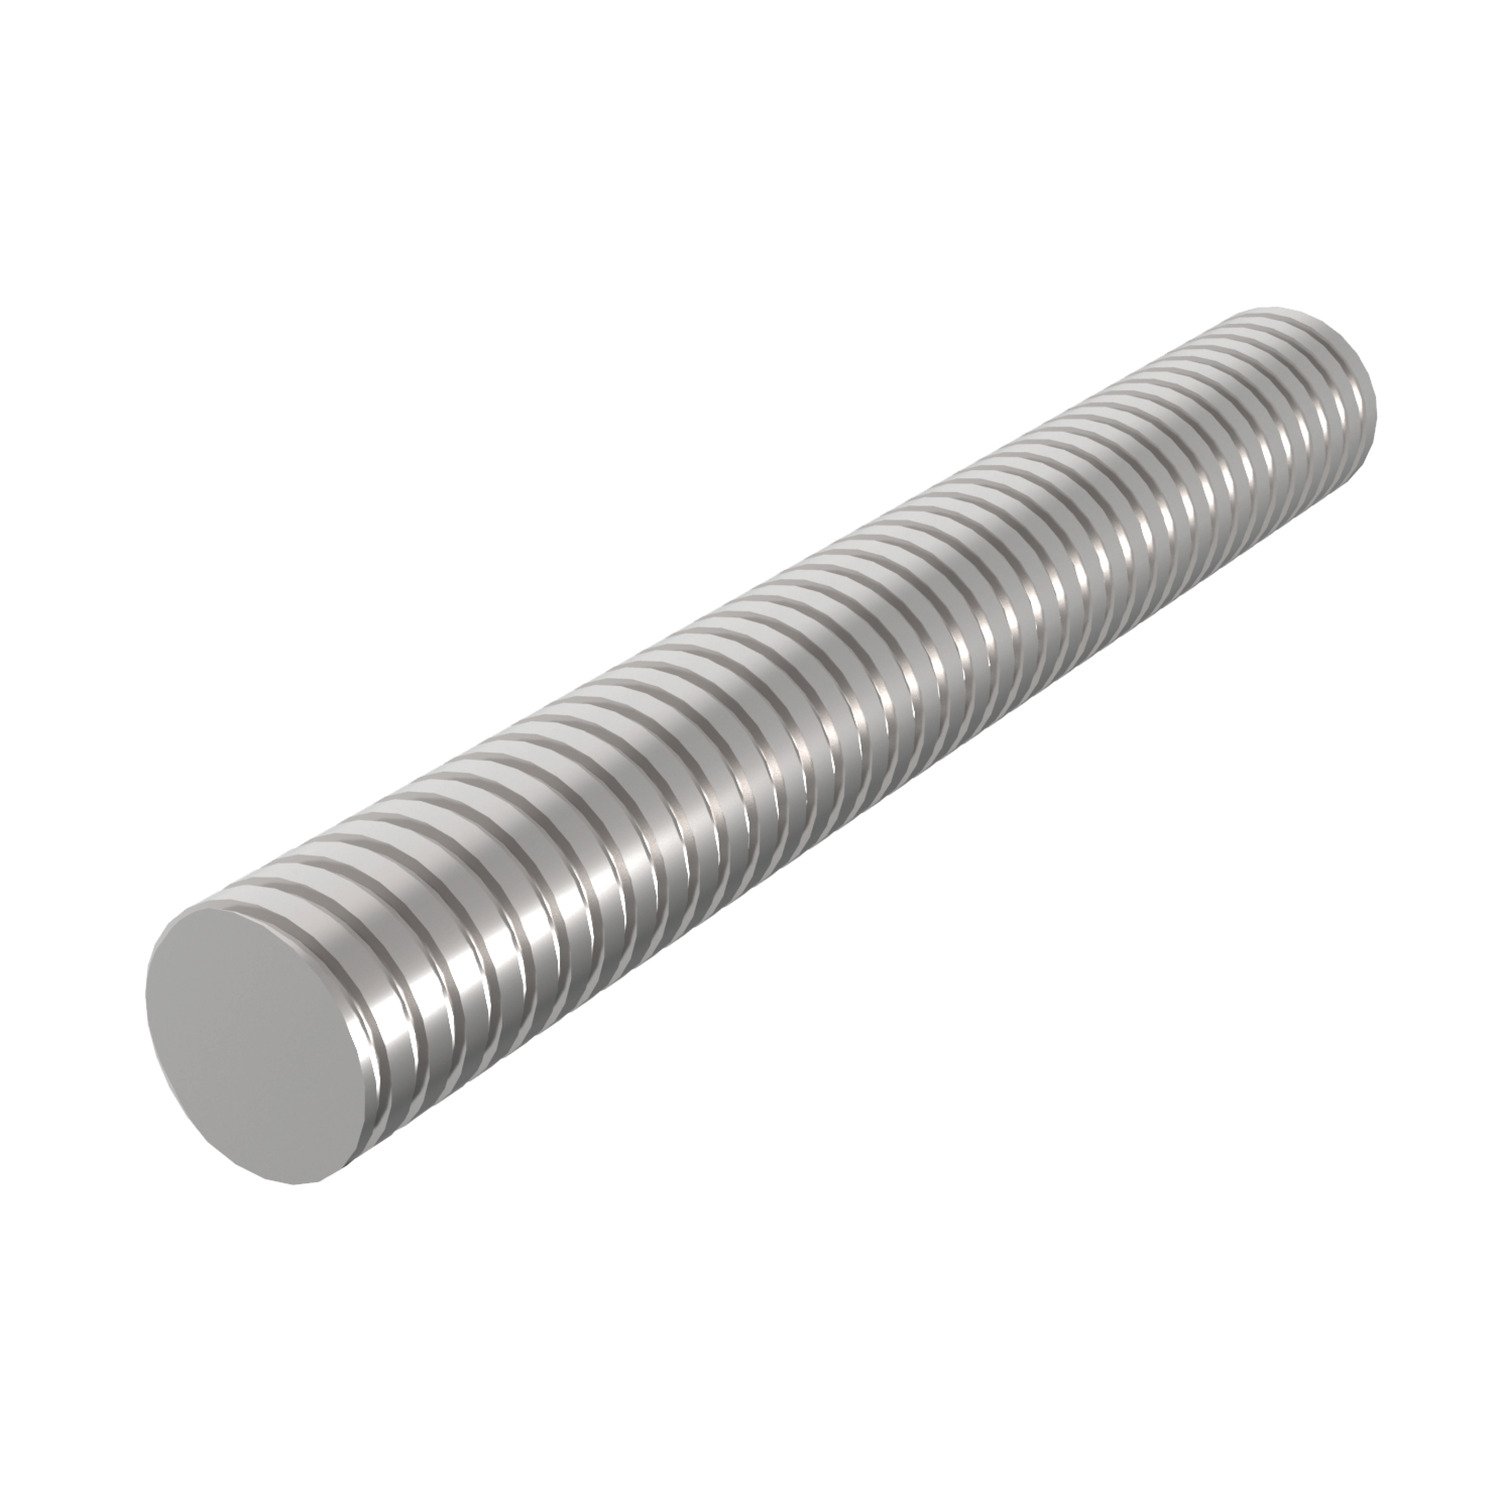 Stainless 304 Lead Screws Right hand thread.  Rolled trapezoidal thread, stainless steel (AISI 304, A2)